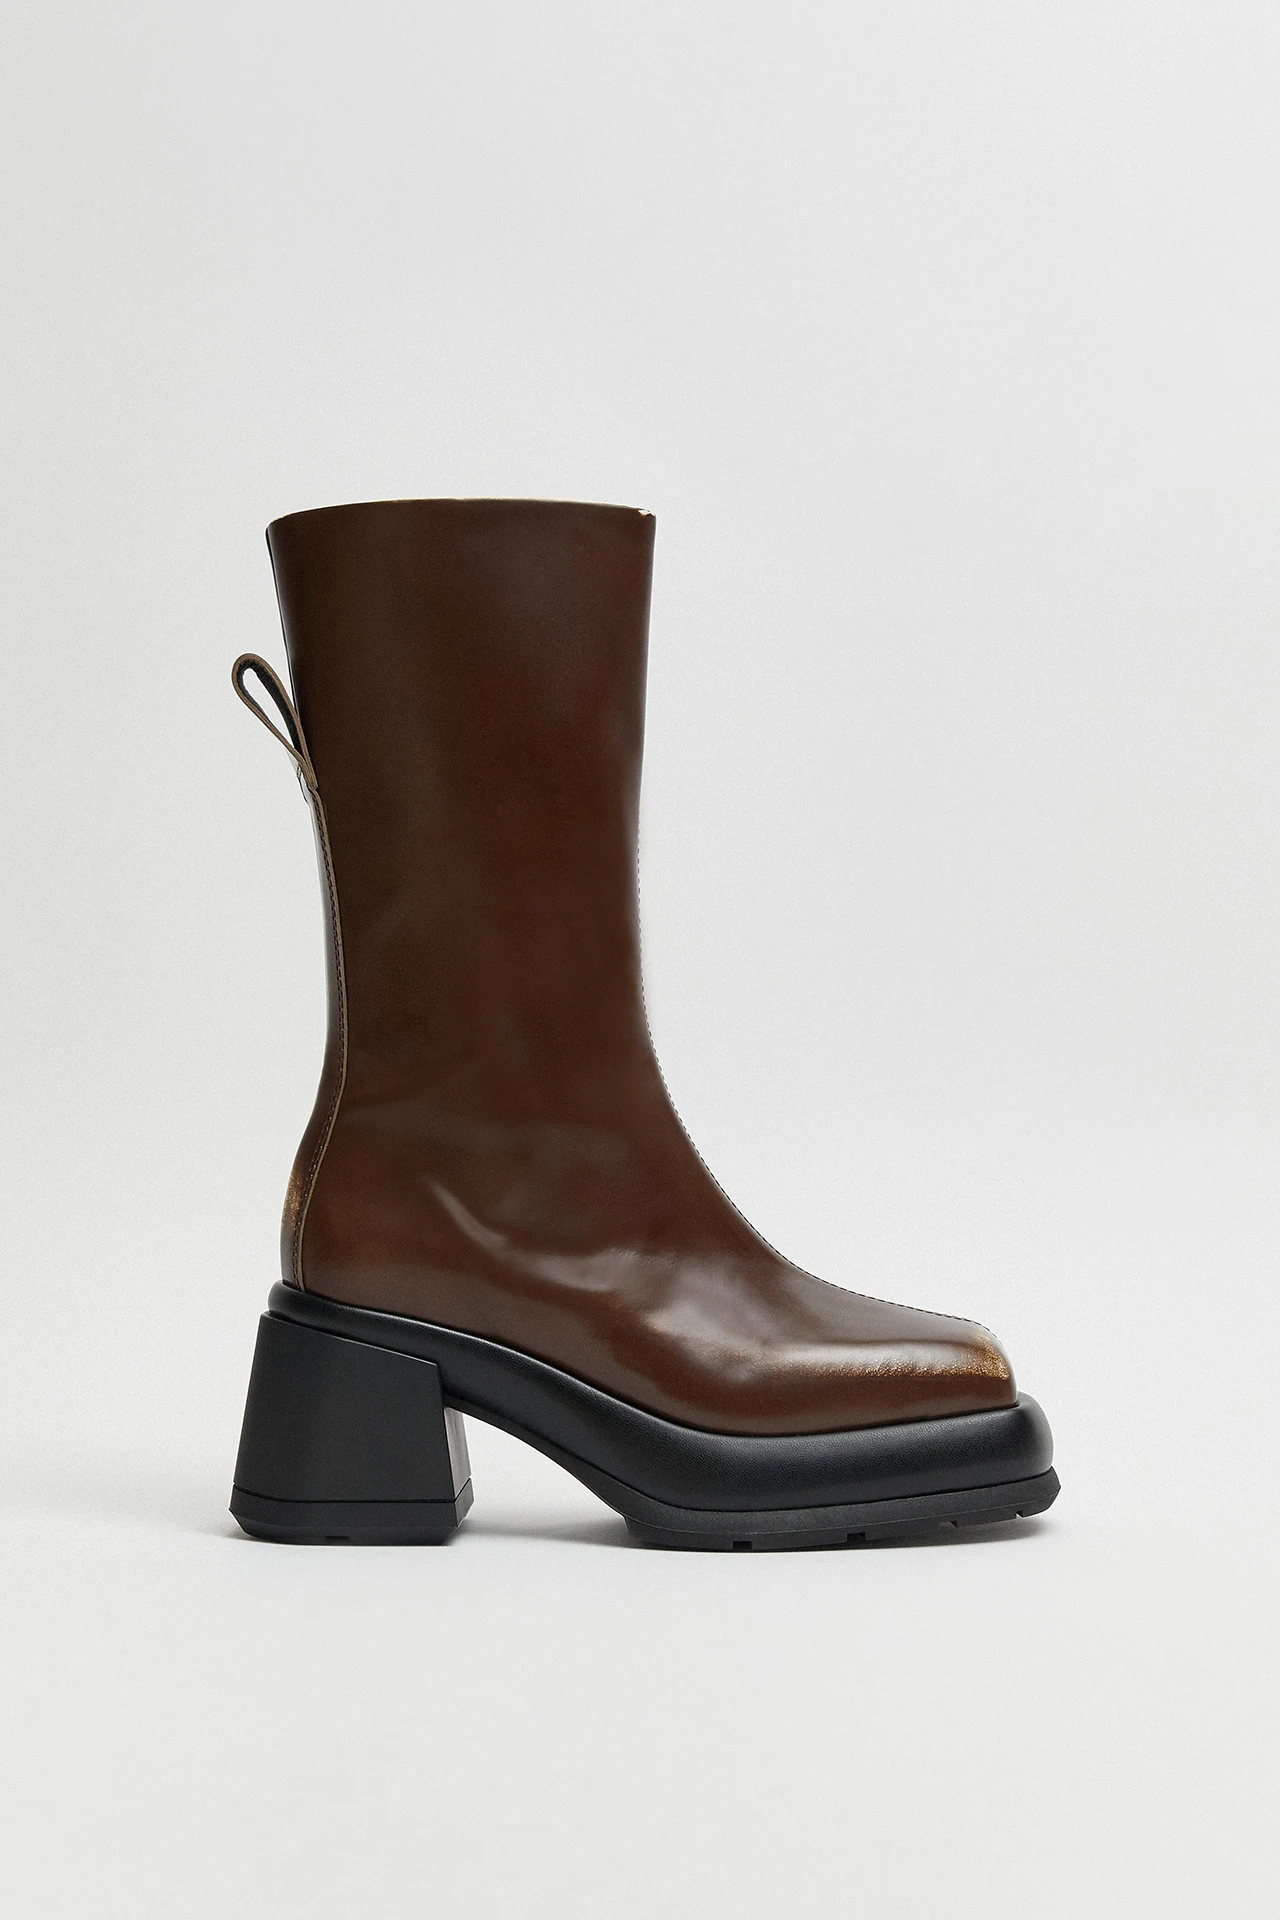 E8-cassia-brown-ankle-boots-01